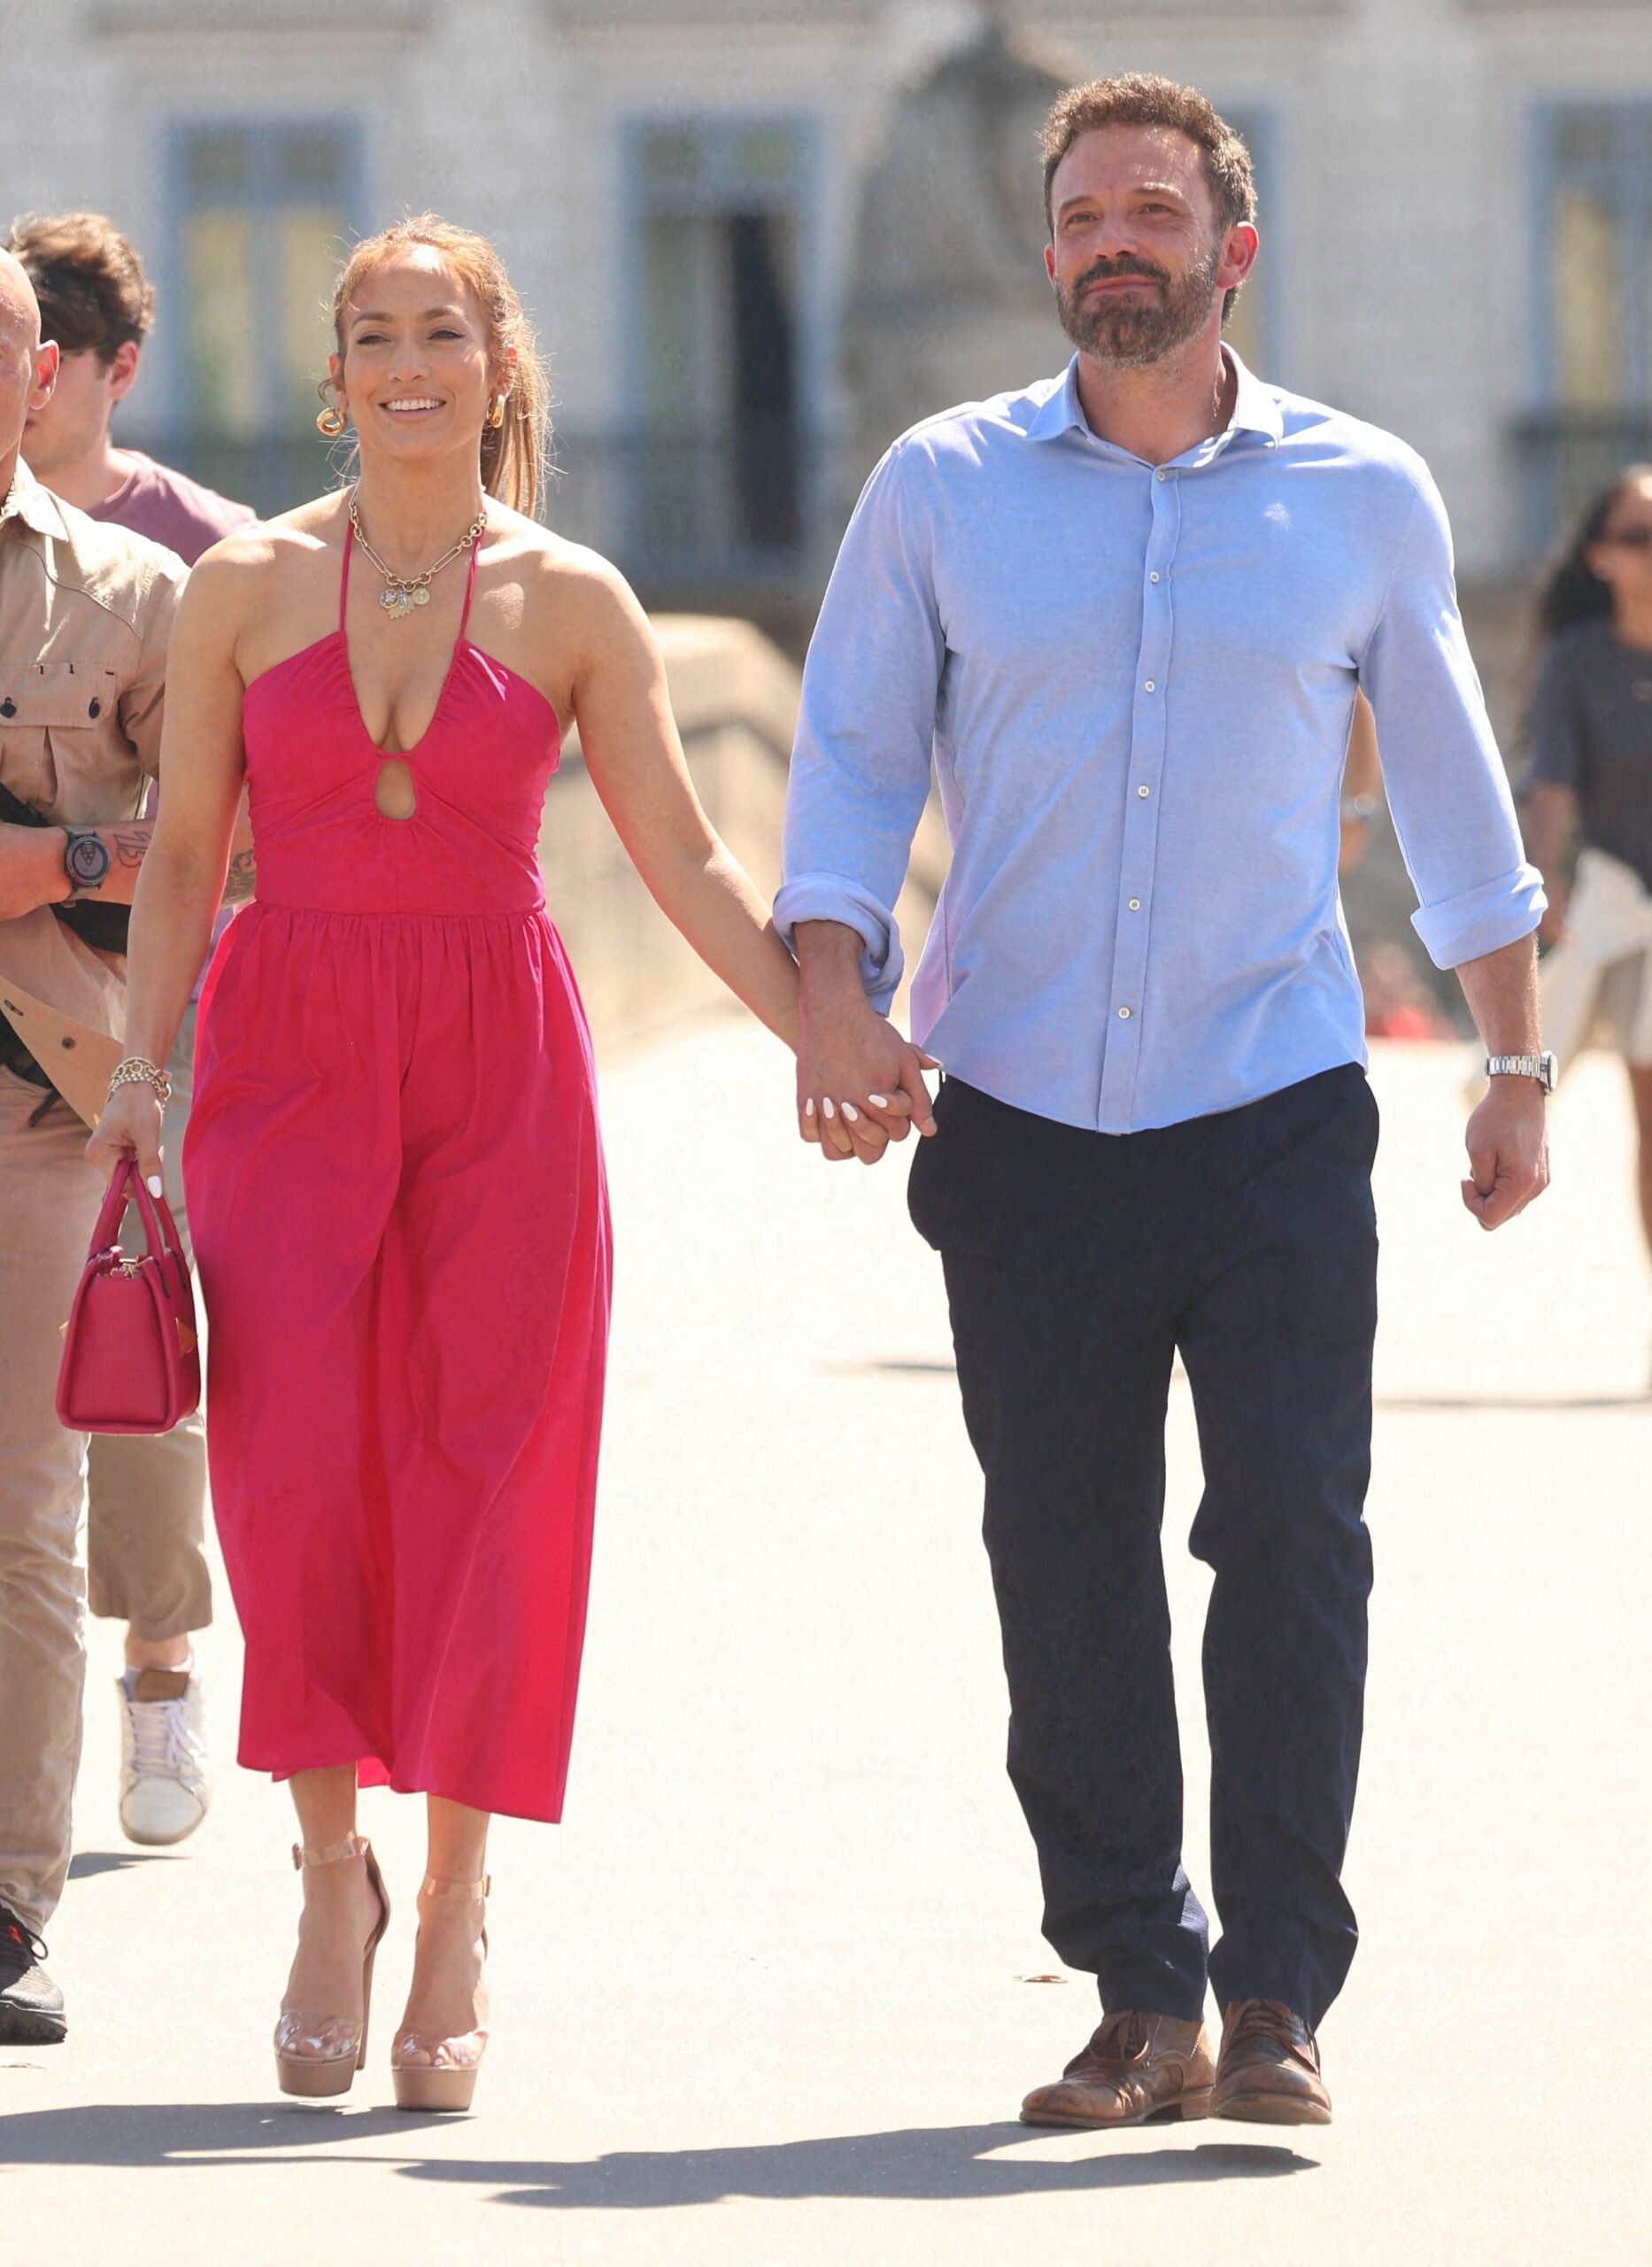 What happened!? Jennifer Lopez and Ben Affleck separate by mutual